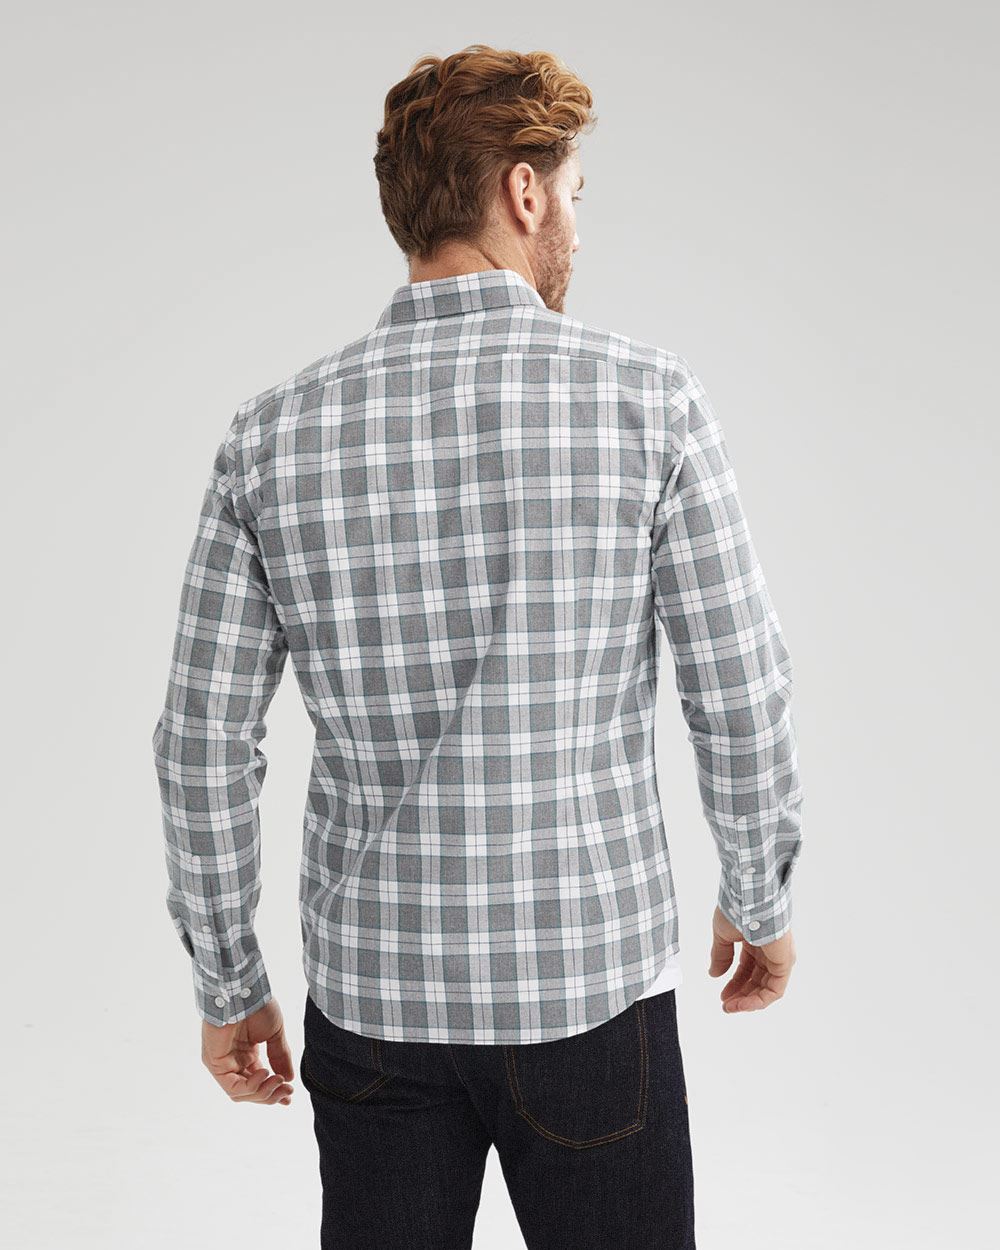 Tailored Fit White and Grey Check Shirt | RW&CO.